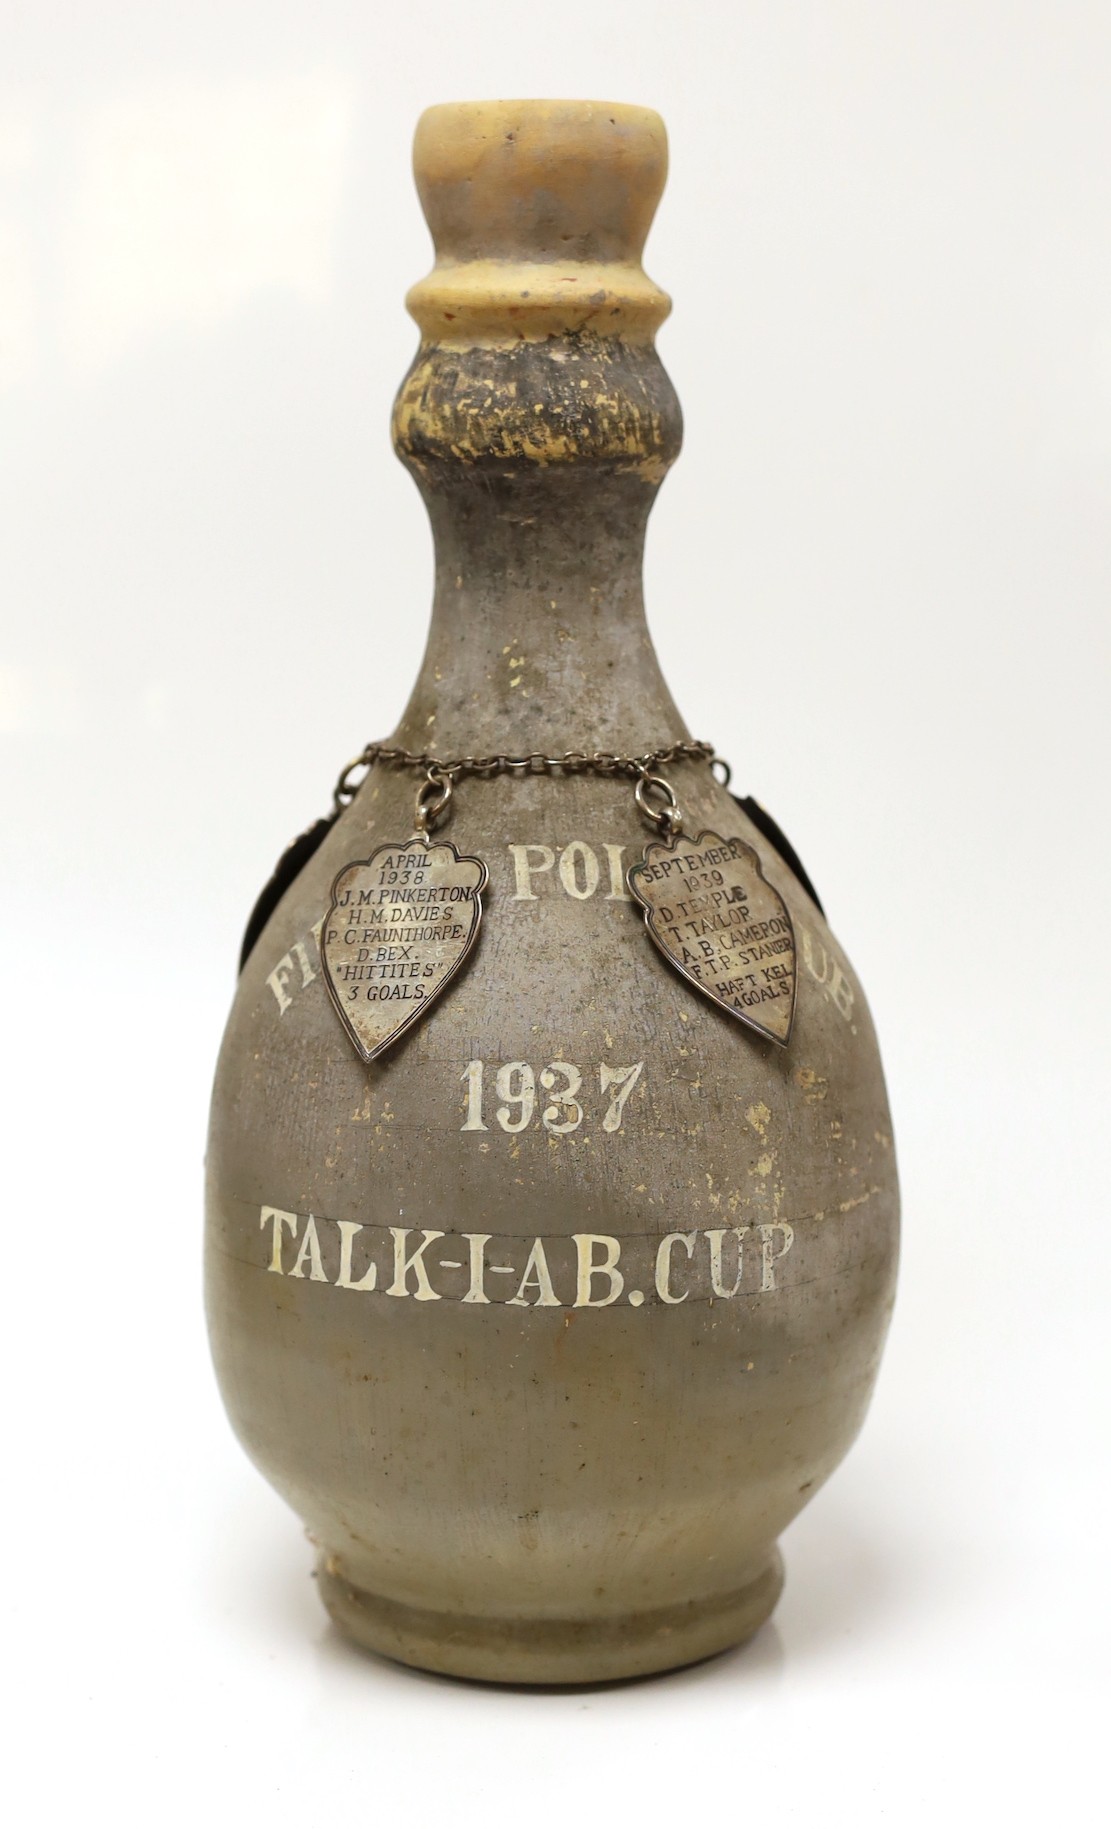 A pottery vase from Fields Polo Club 'The Talk-1-AB Cup', with four white metal badges on a chain engraved with the winners from 1937, 1938, 1939 and 1945, 35cm